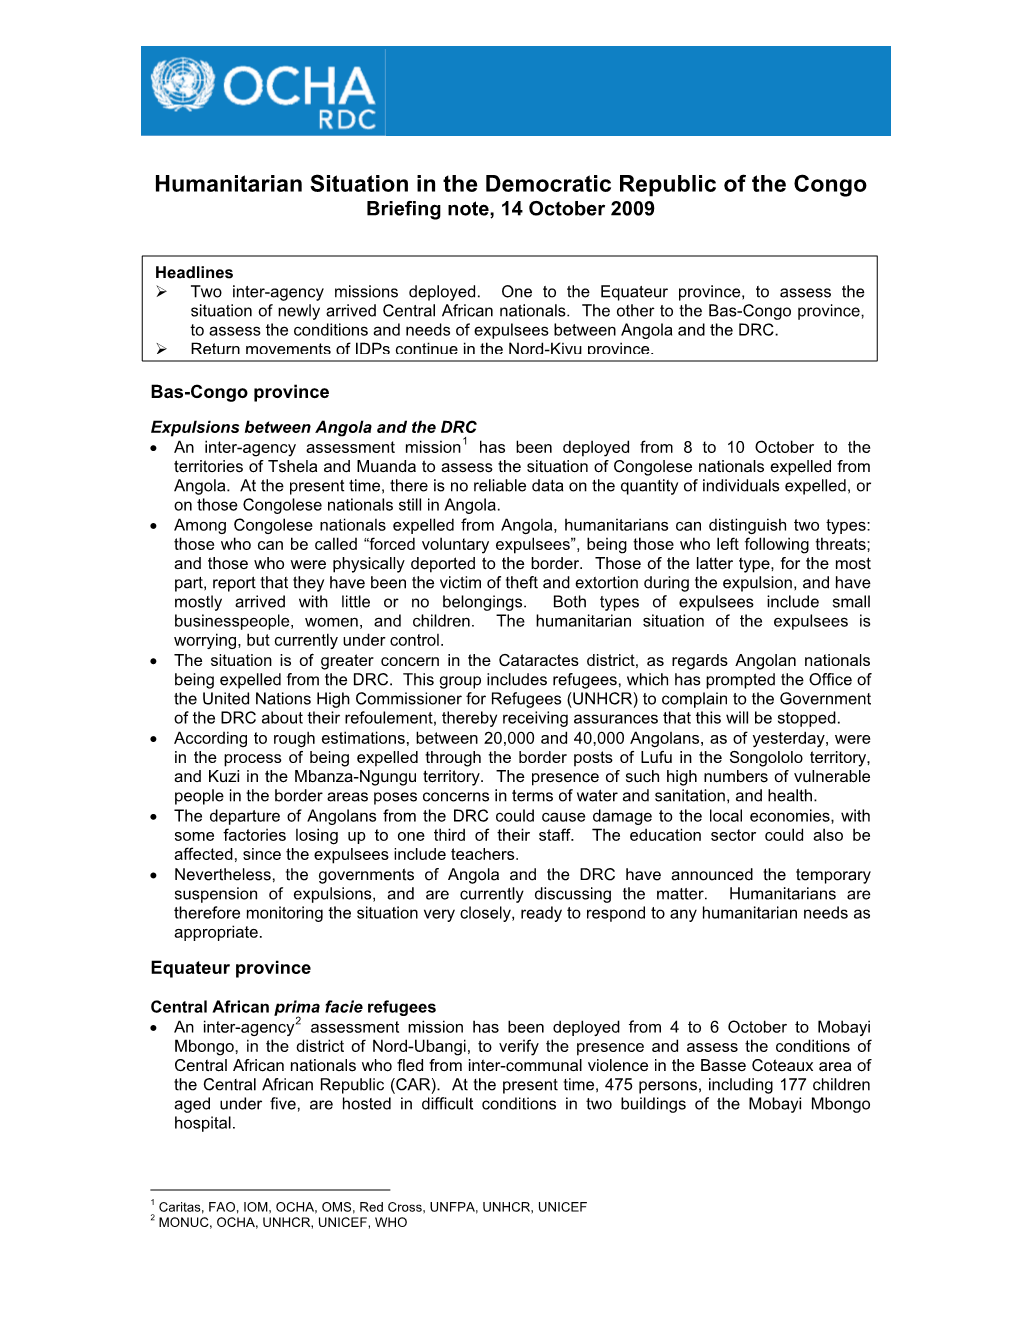 Humanitarian Situation in the Democratic Republic of the Congo Briefing Note, 14 October 2009